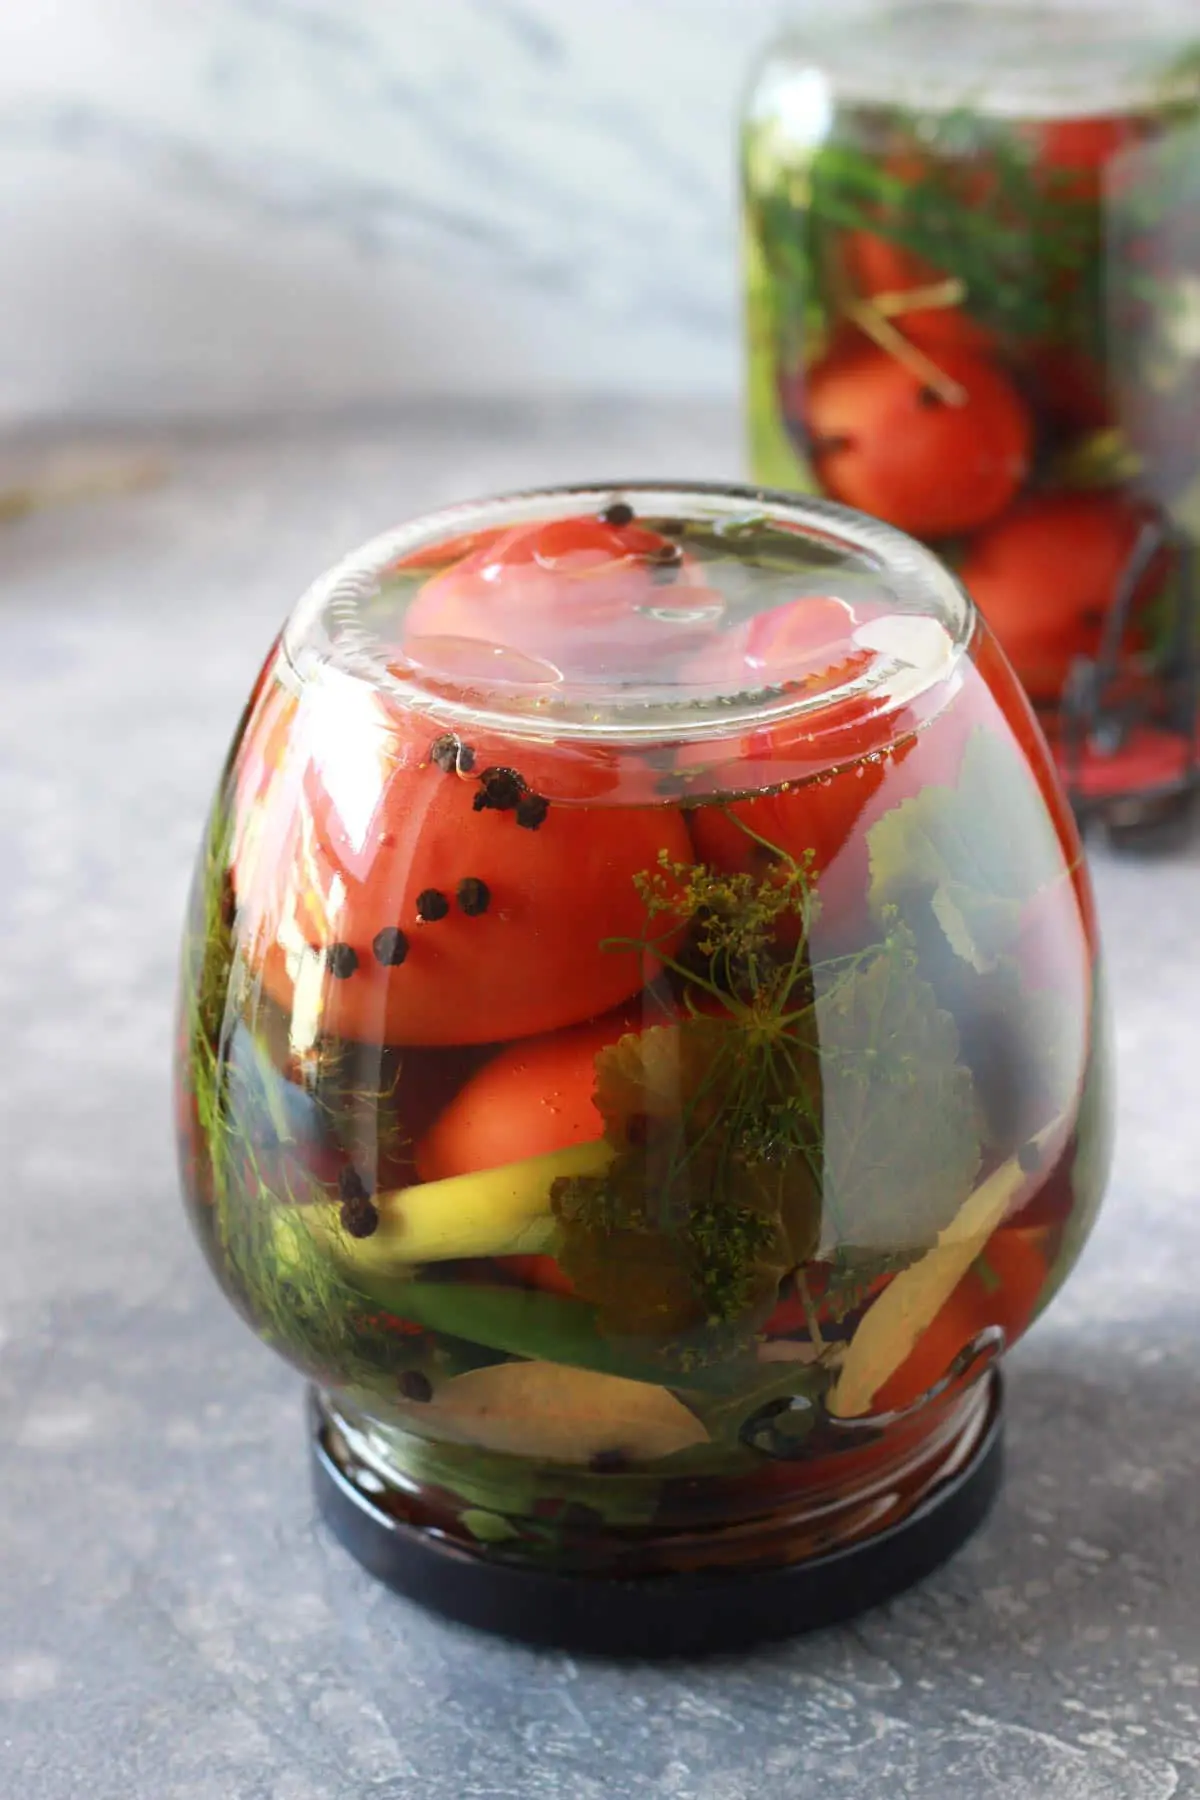 A jar with tomatoes upside down.